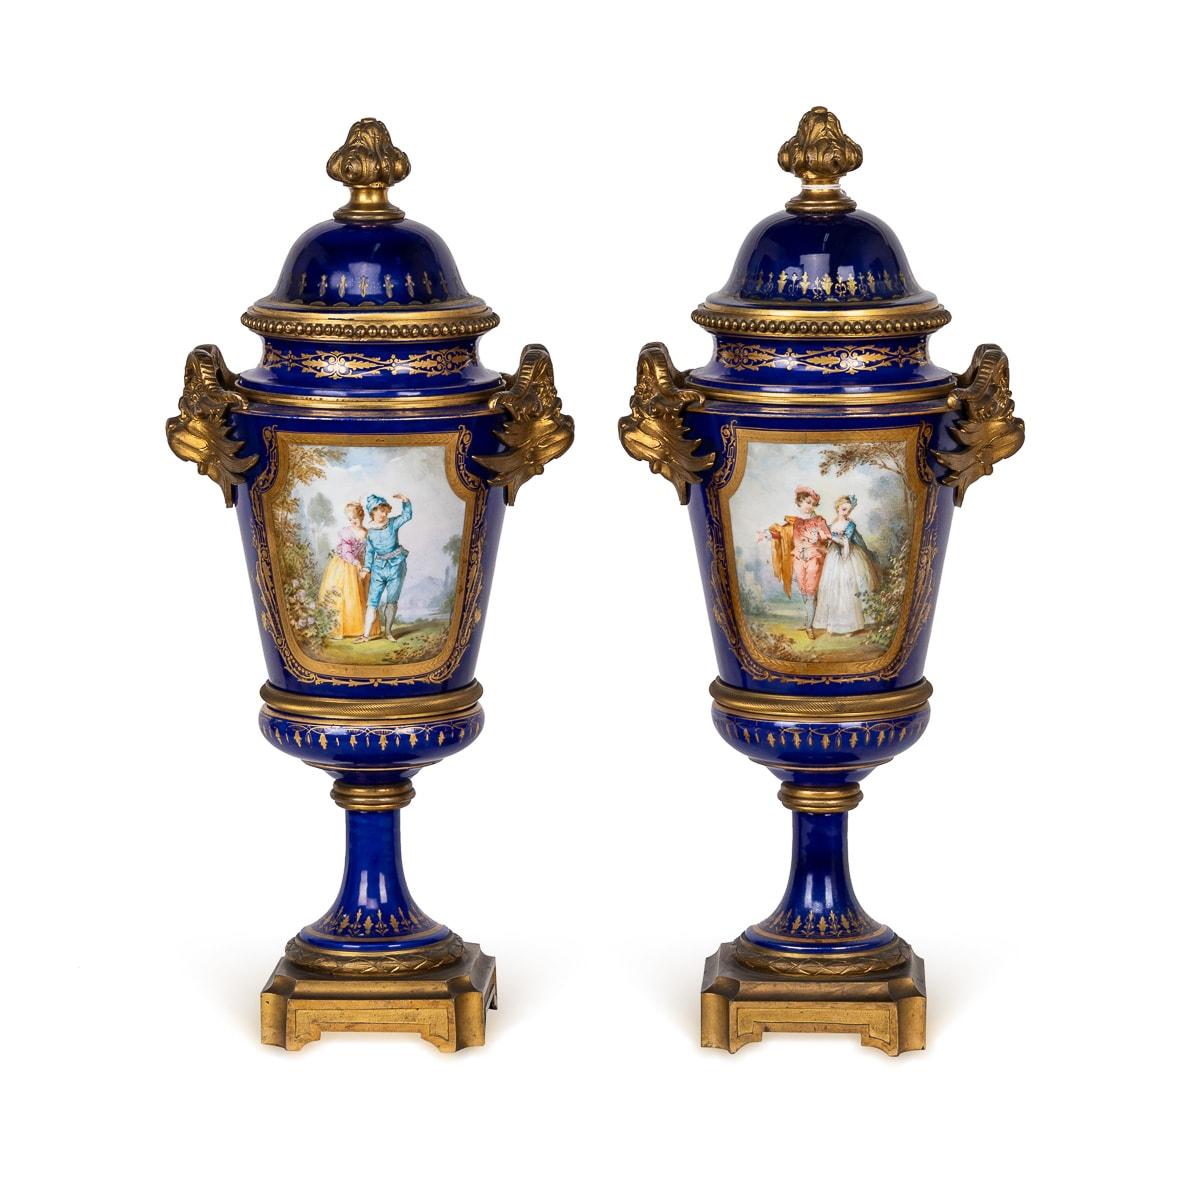 Antique 19th Century French Serres porcelain pair of lidded vases, exude elegance with their ornate ormolu mounts. Delicately adorned with graceful acanthus leaf handles, each vase features a lid crowned by a flower bulb finial, encircled by